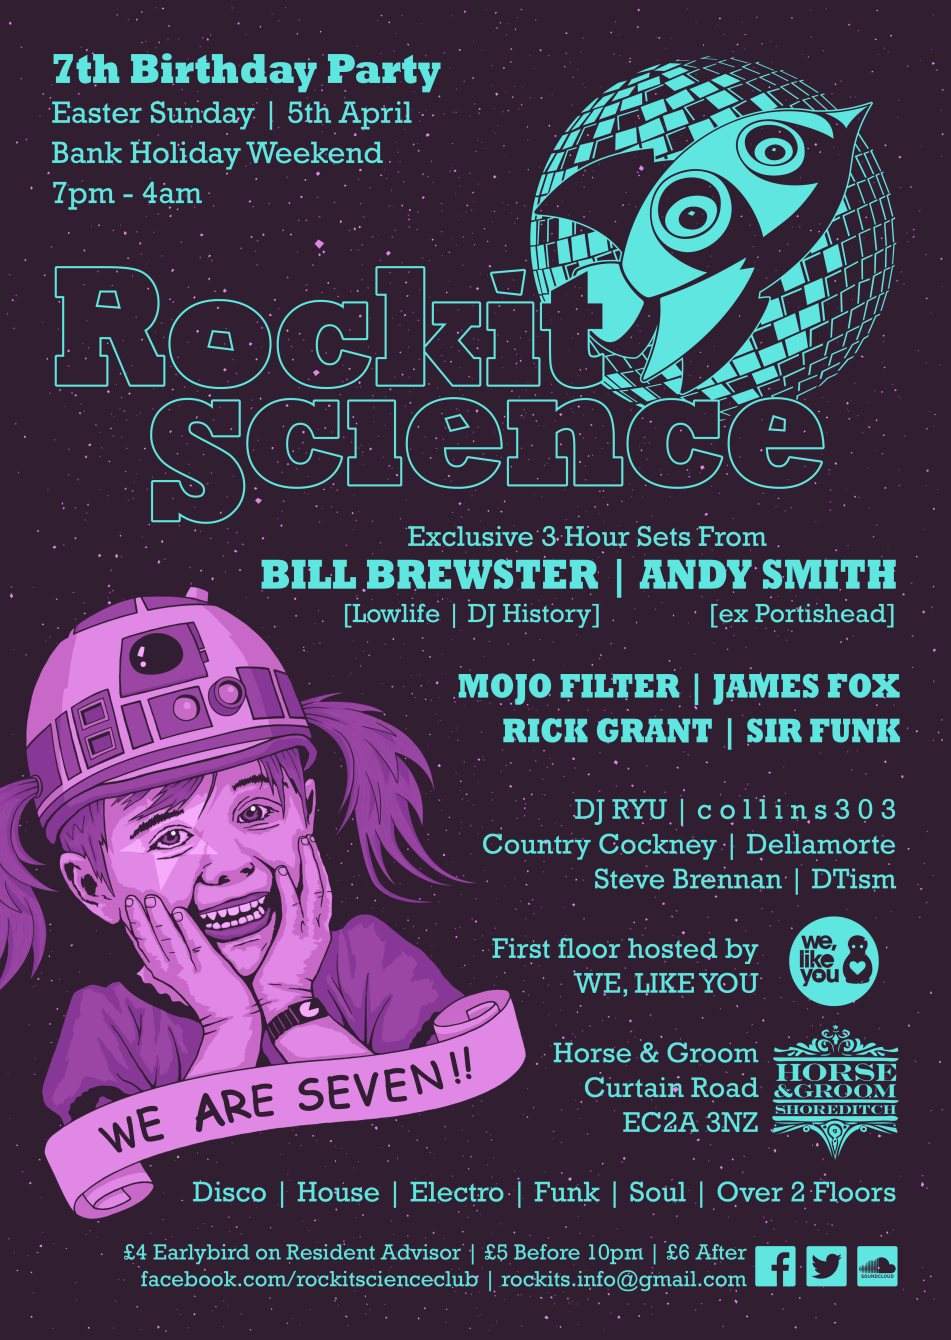 Rockit Science 7th Birthday with Bill Brewster & Andy Smith - Página frontal